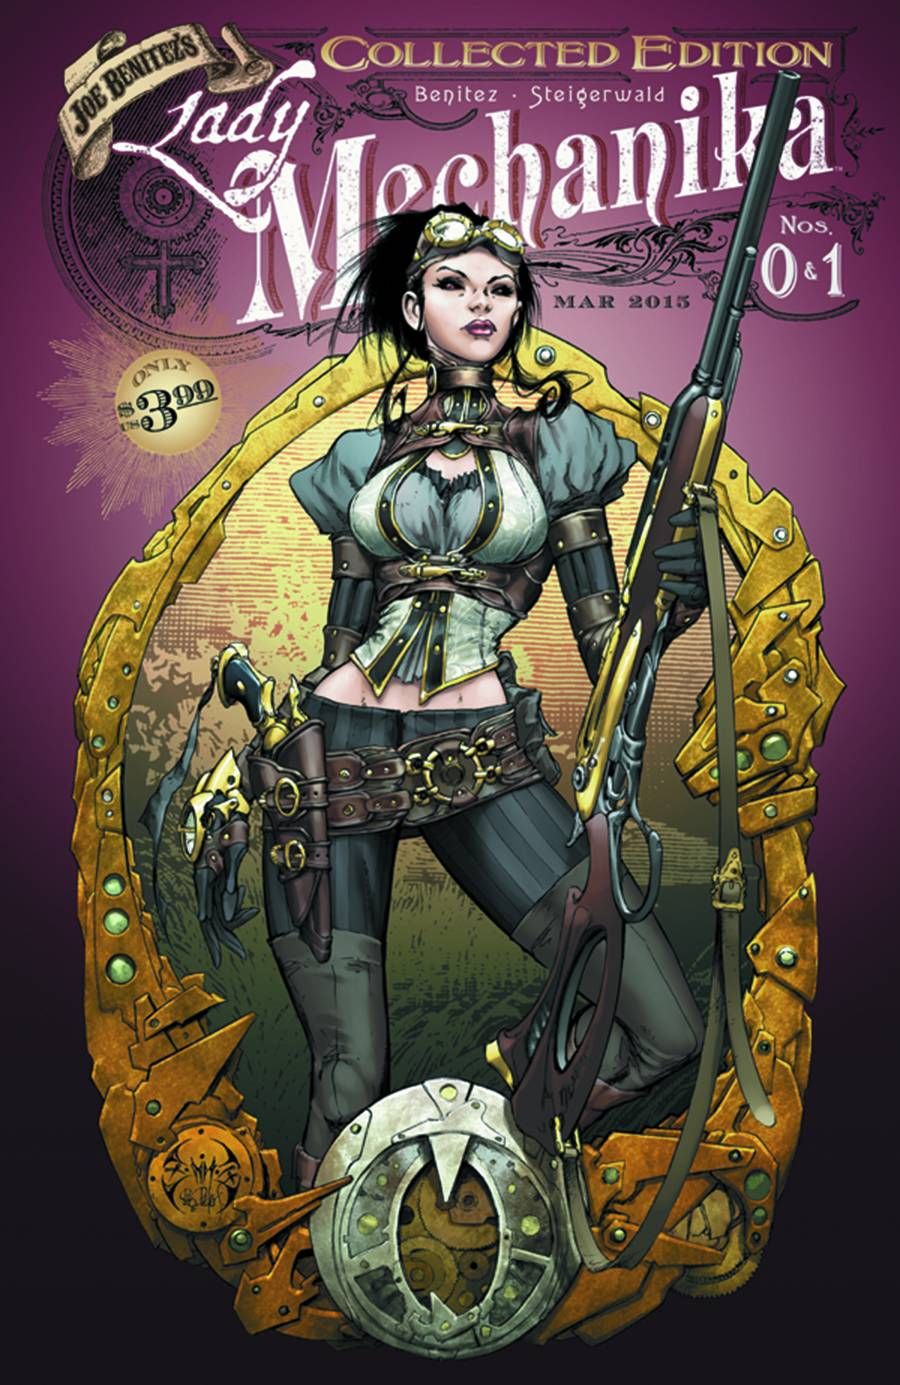 Lady Mechanika Collected Edition #0-1 Comic